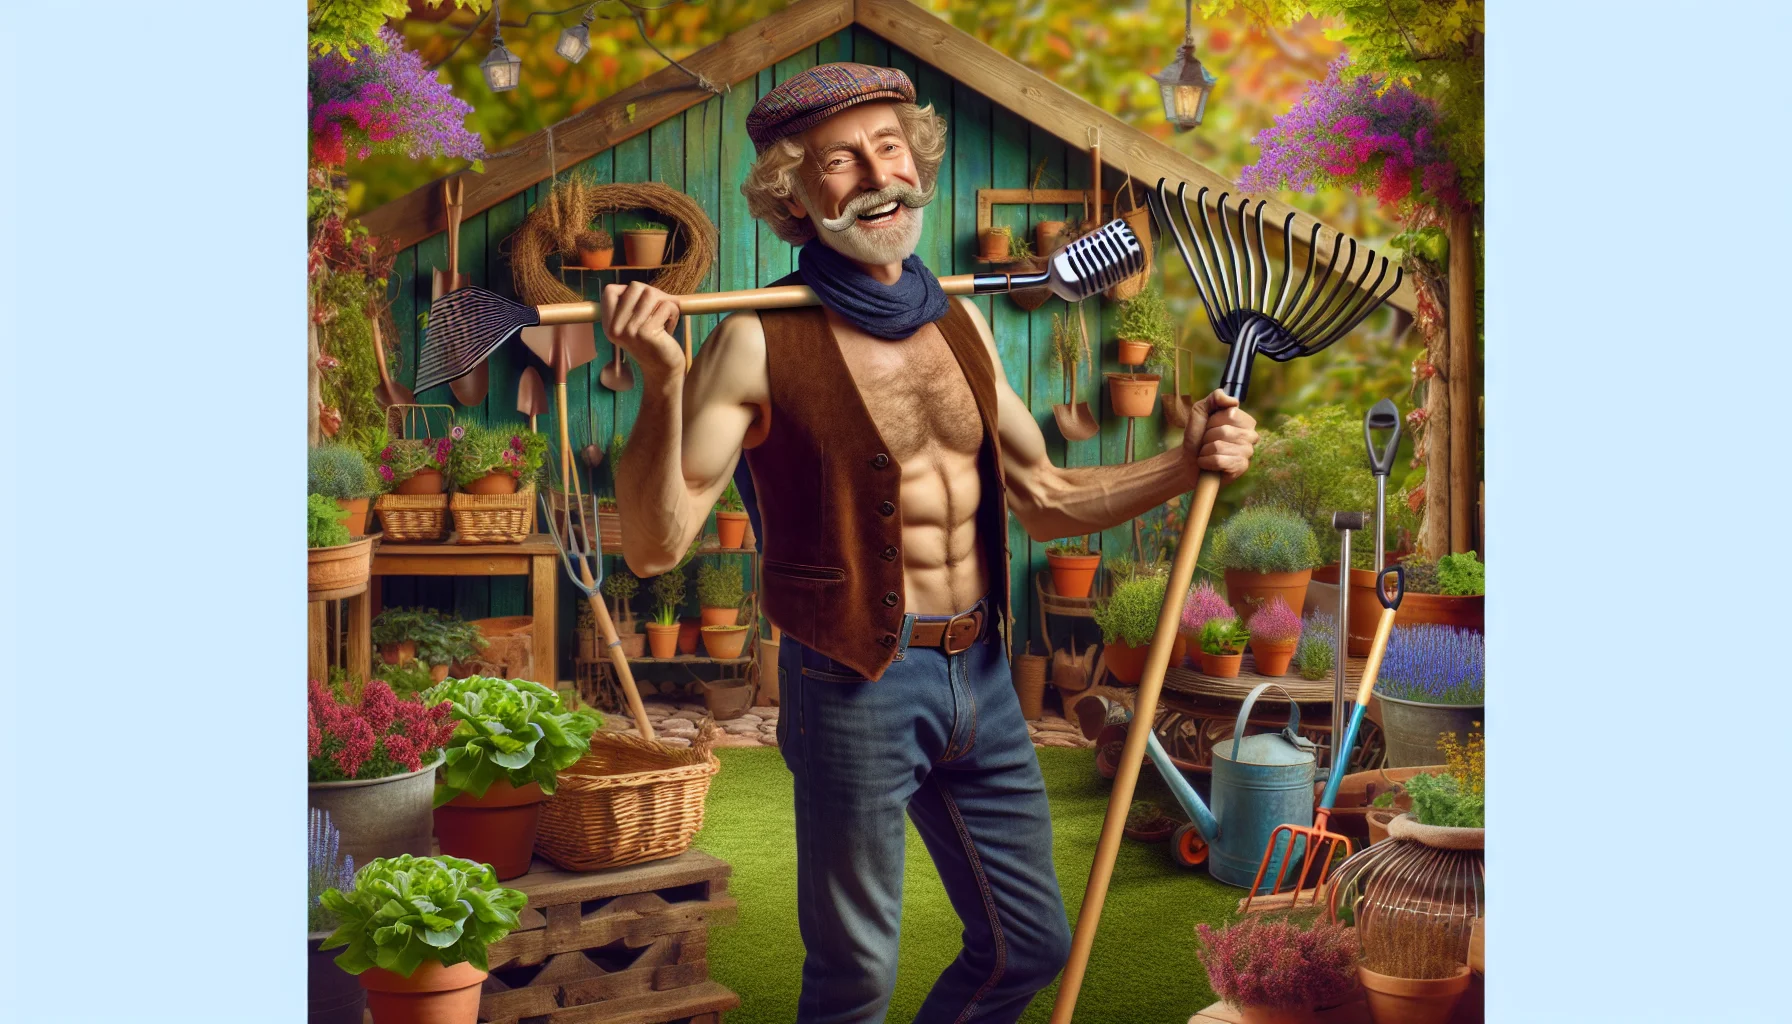 Generate a realistic image of a charismatic and quirky individual who looks traditionally masculine, has a relaxed physique, and bears a cap on his head. This character, who is not any specific person, stands in an enchanting garden shed, surrounded by a variety of plants, gardening tools, and pots. With a big grin, he conducts a mock concert with a rake as his microphone, encouraging everyone around to partake in the joy of gardening.